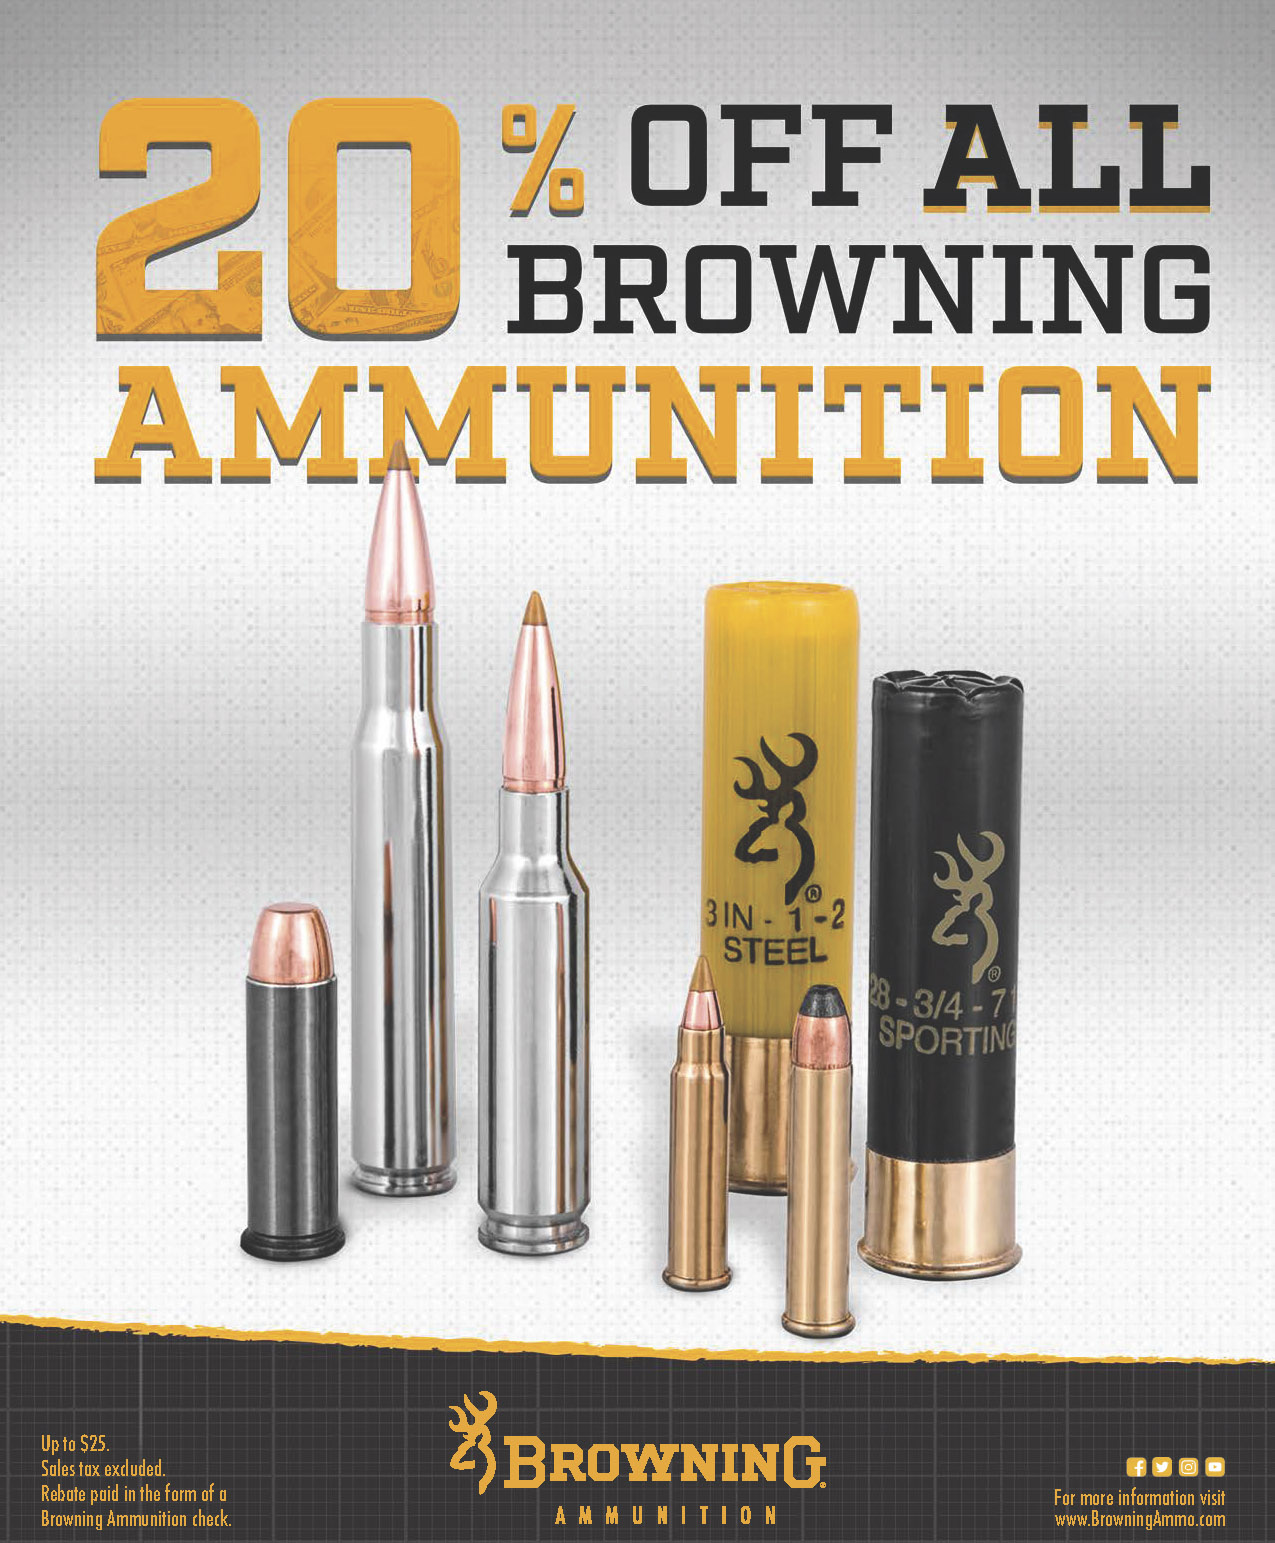 Winchester Ammo Rebate Phone Number